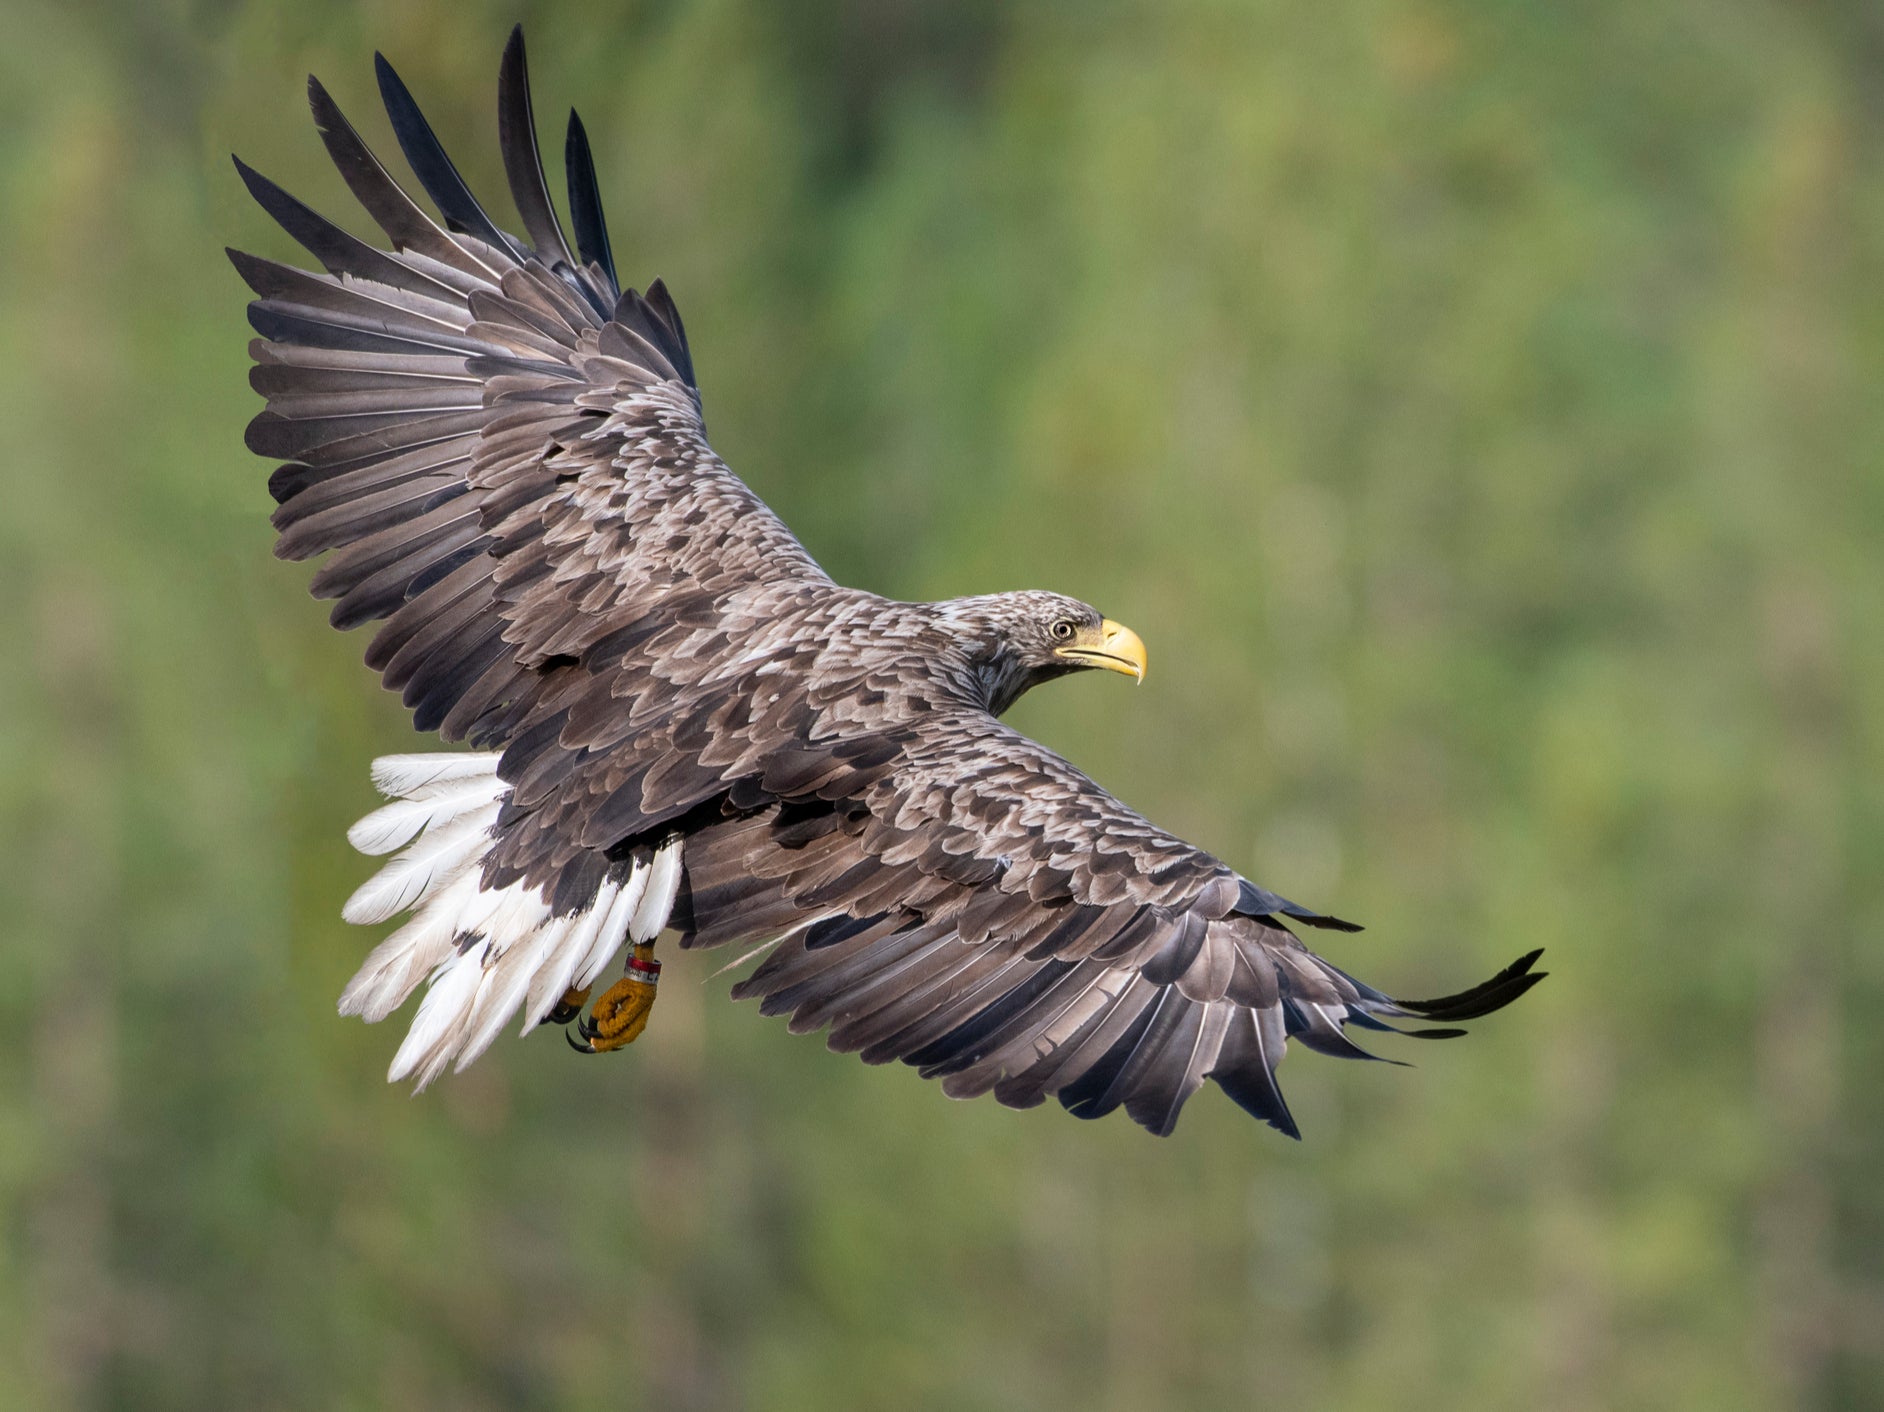 The white-tailed eagle, also known as the sea eagle, or ‘flying barn doors' is the UK’s biggest bird of prey with a wingspan of up to 8 feet